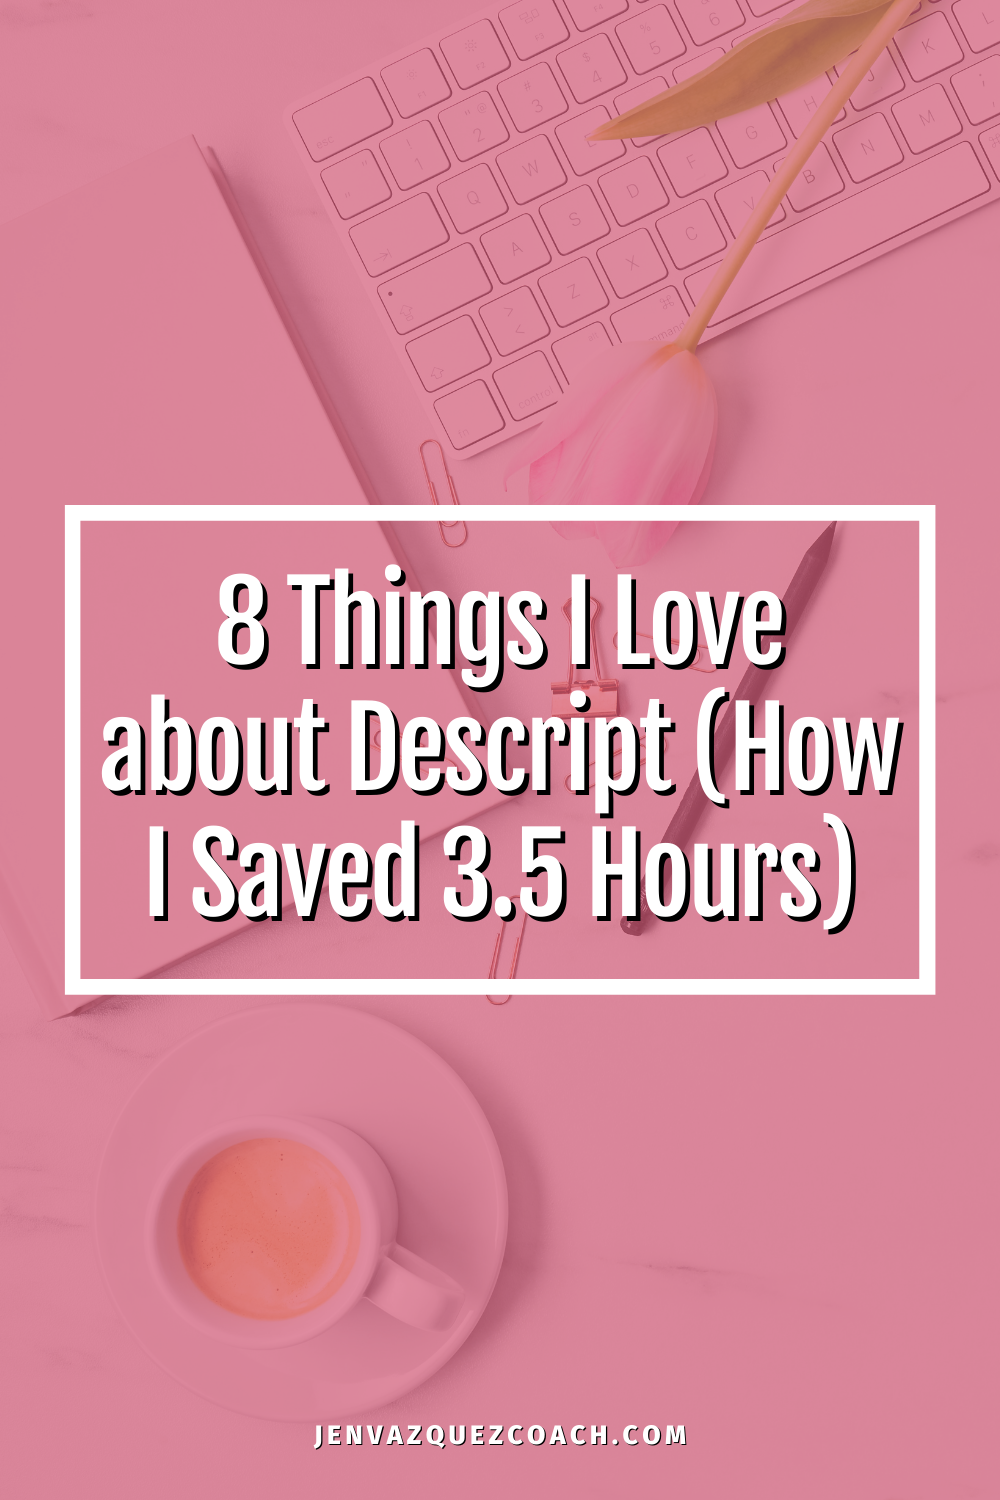 8 Things I Love about Descript (How I Saved 3.5 Hours) by Jen Vazquez Media